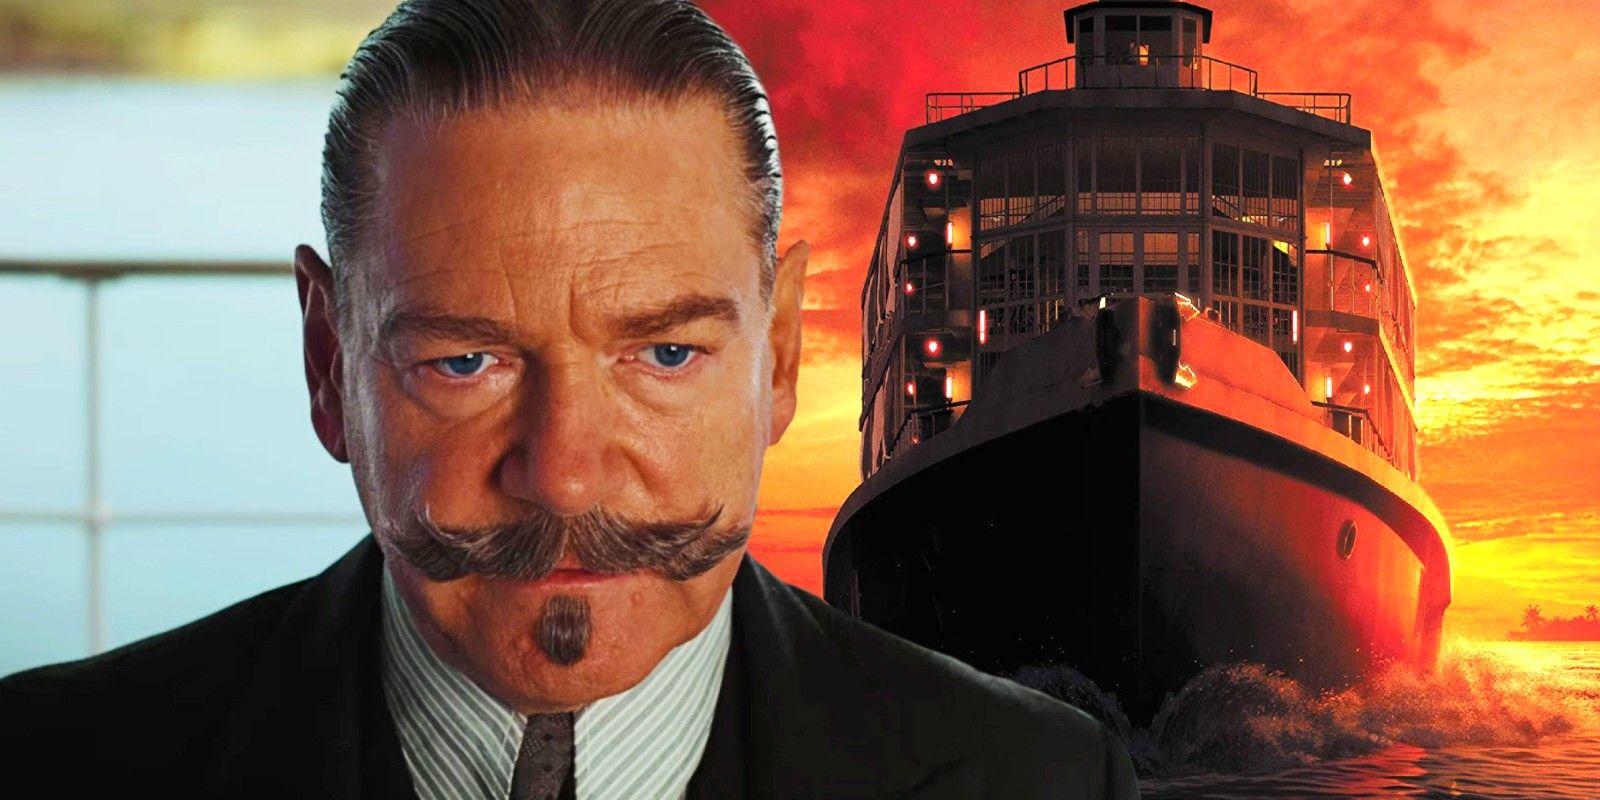 Blended image showing Poirot and a cruise ship in Death on the Nile